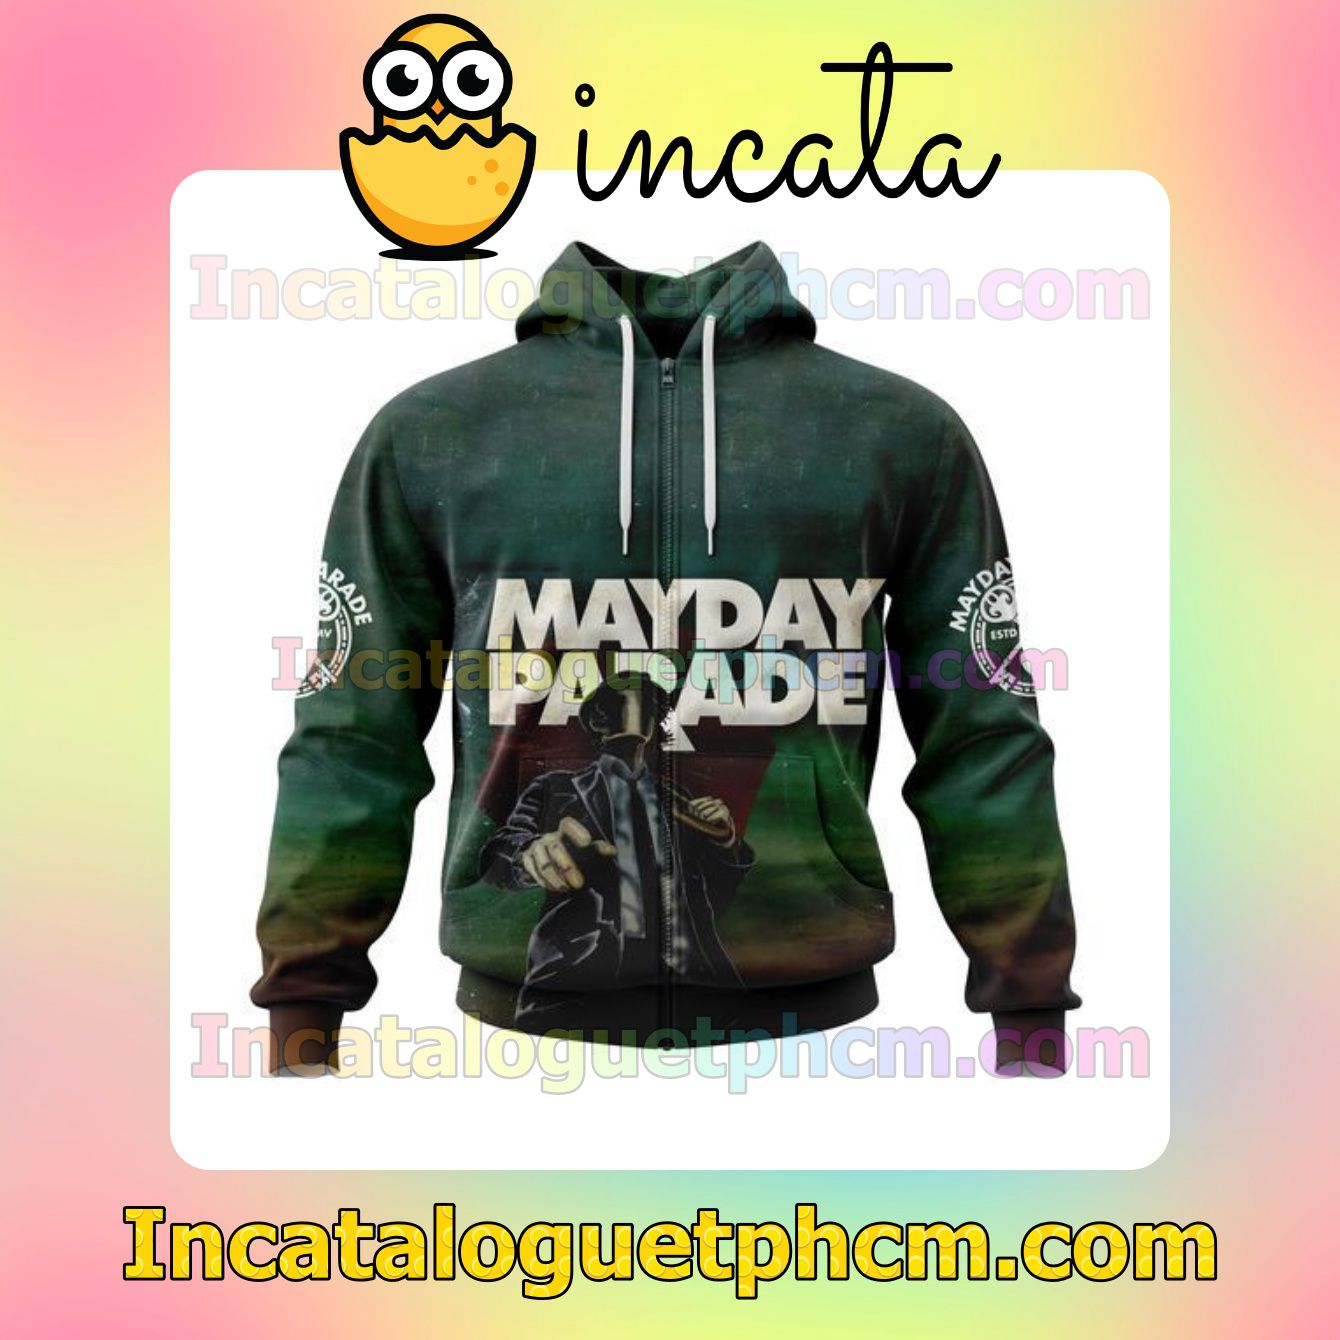 Gorgeous Personalized Mayday Parade Self Titled Album Cover Fleece Zip Up Hoodie